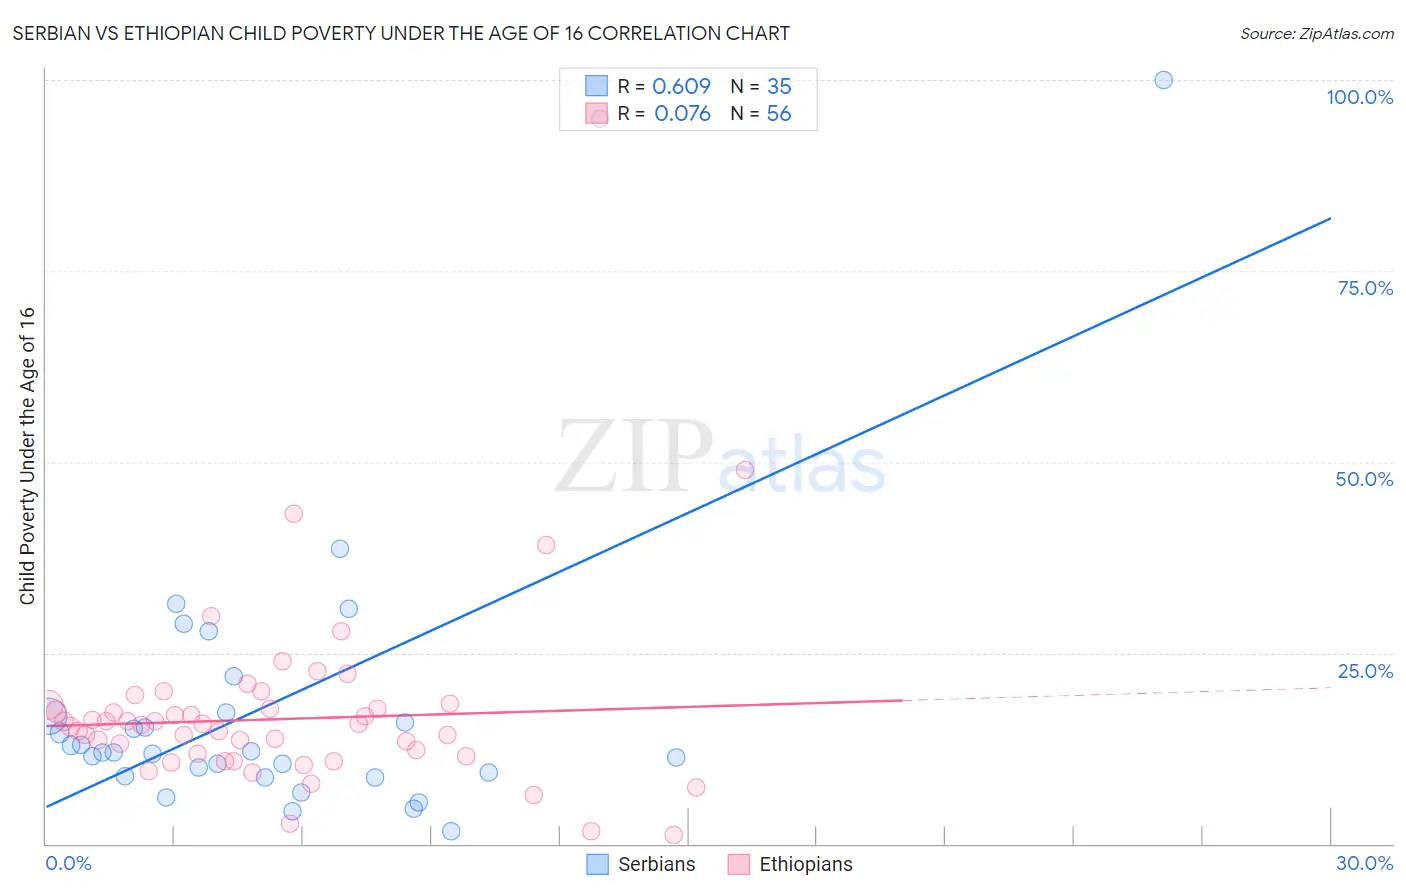 Serbian vs Ethiopian Child Poverty Under the Age of 16